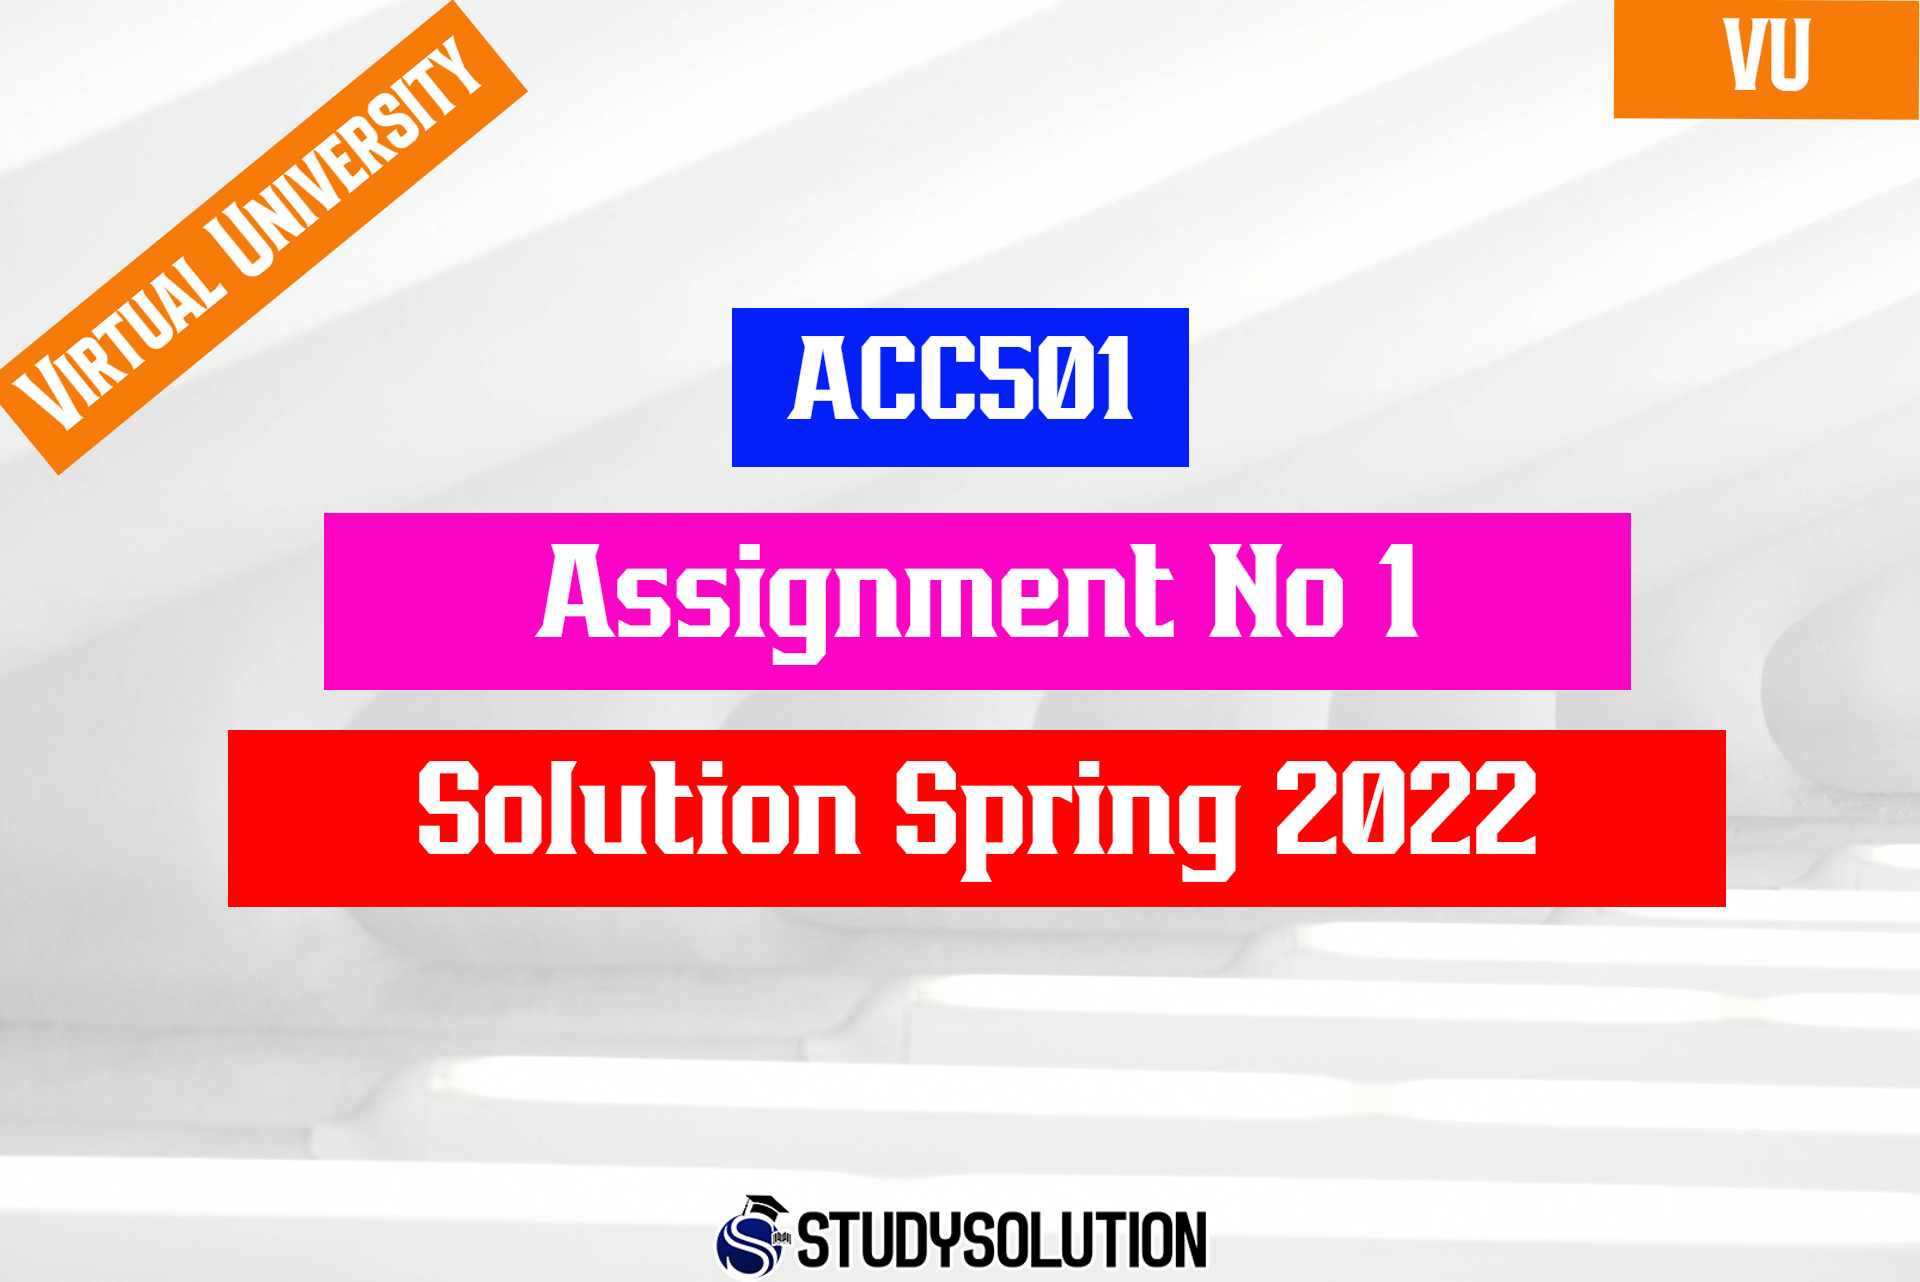 ACC501 Assignment No 1 Solution Spring 2022